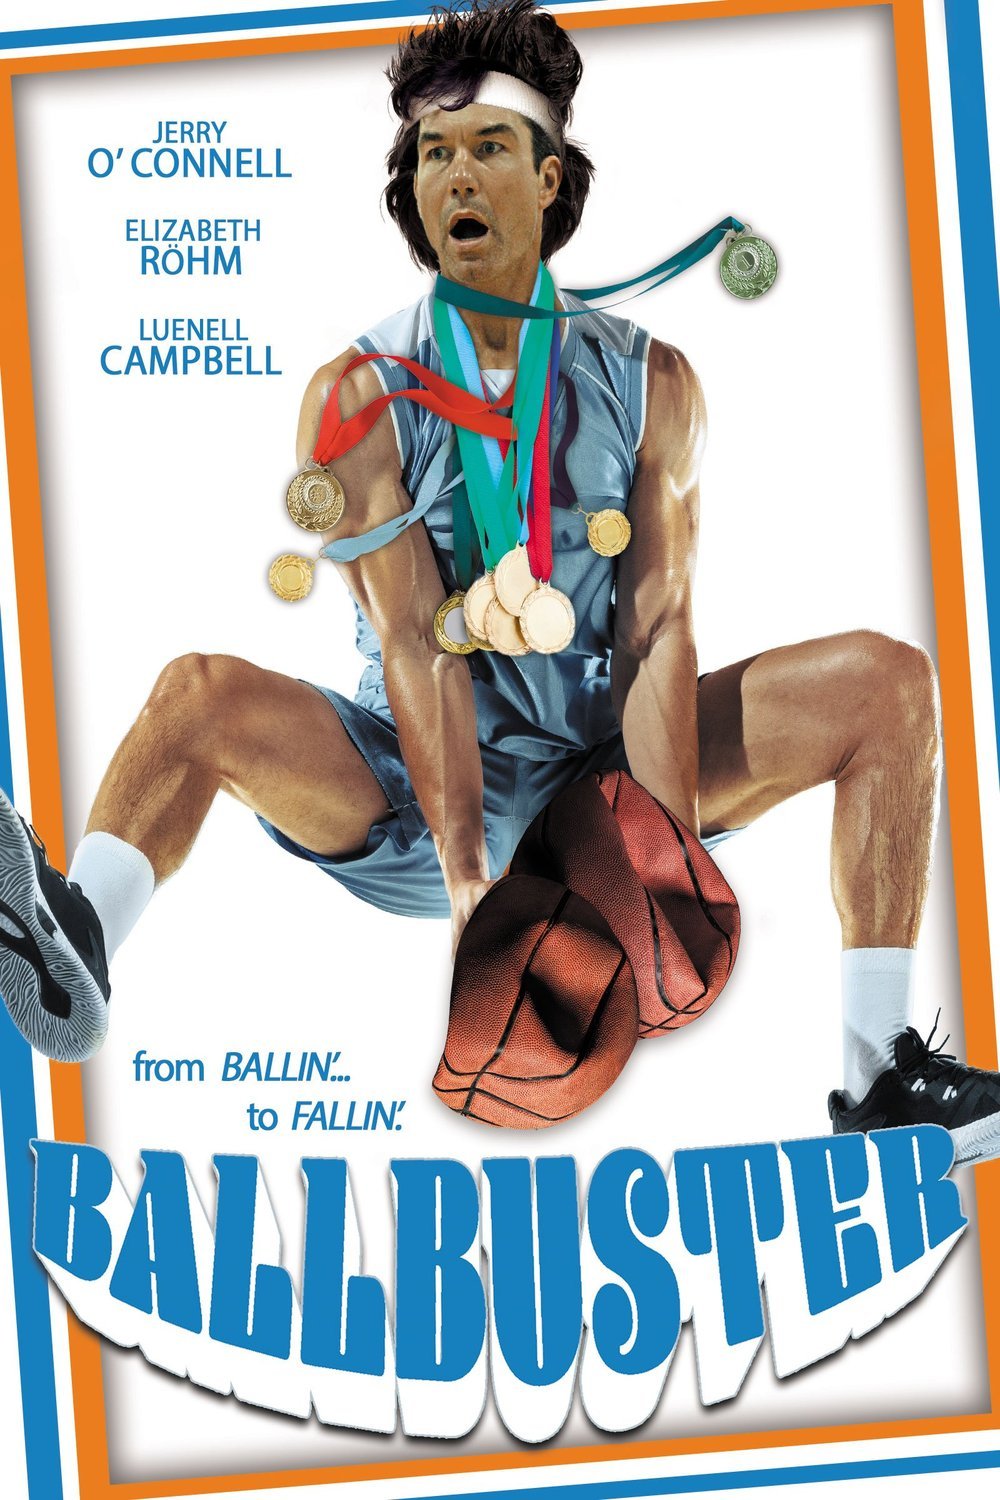 Poster of the movie Ballbuster